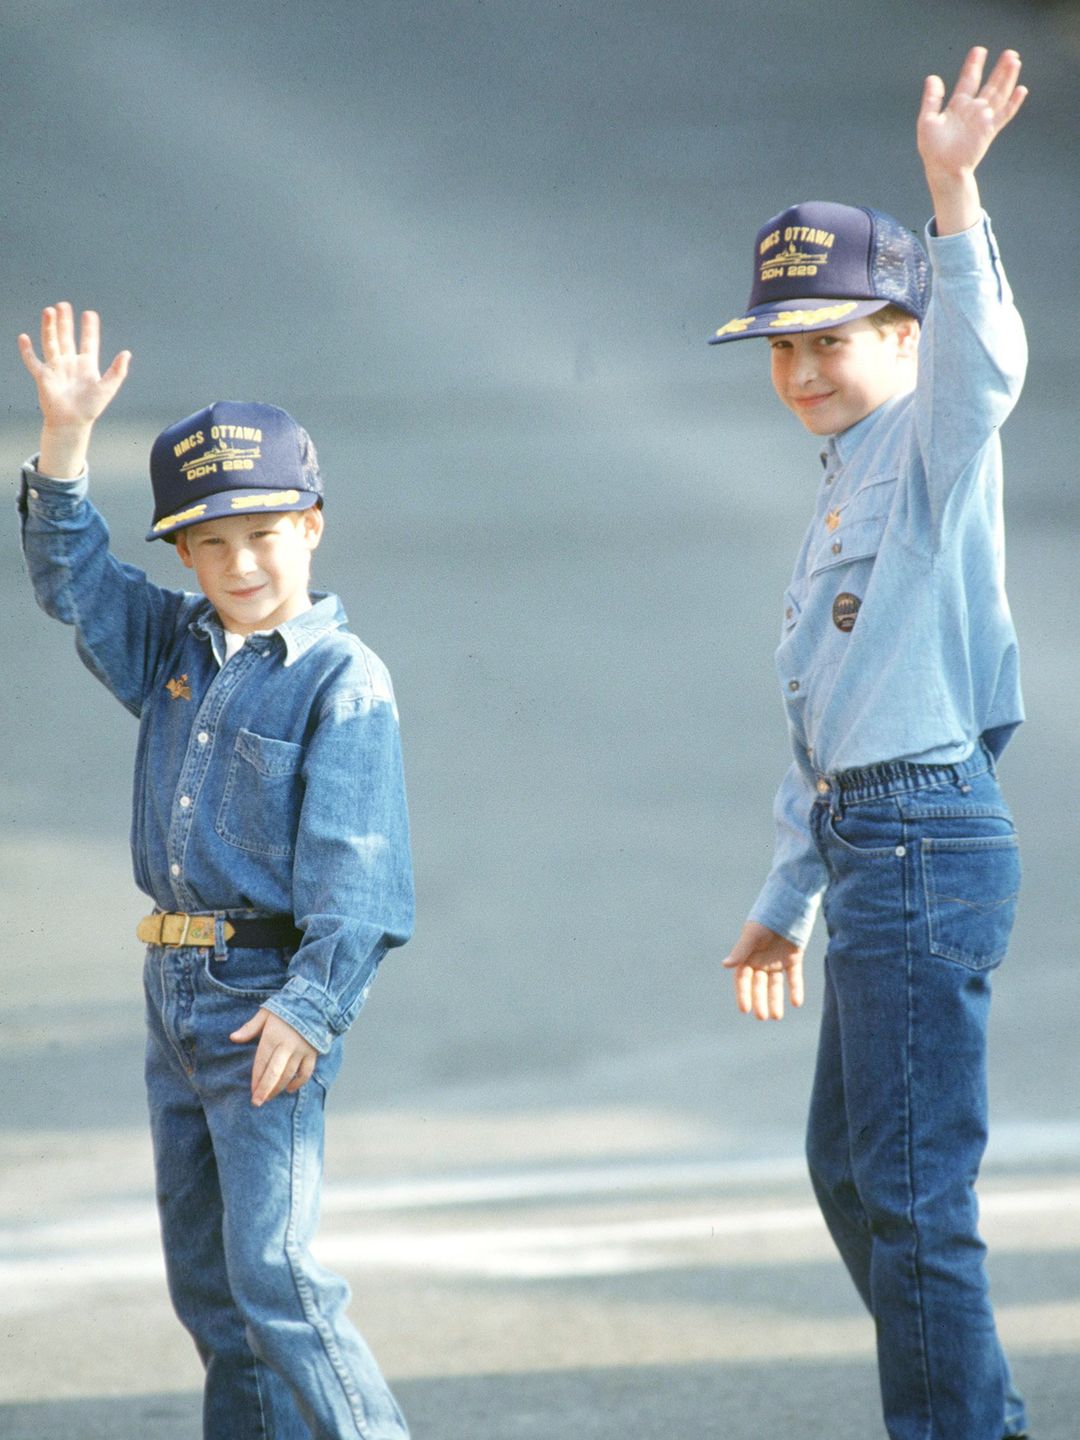 A young Prince William and Prince Harry in denim outfits and baseball caps